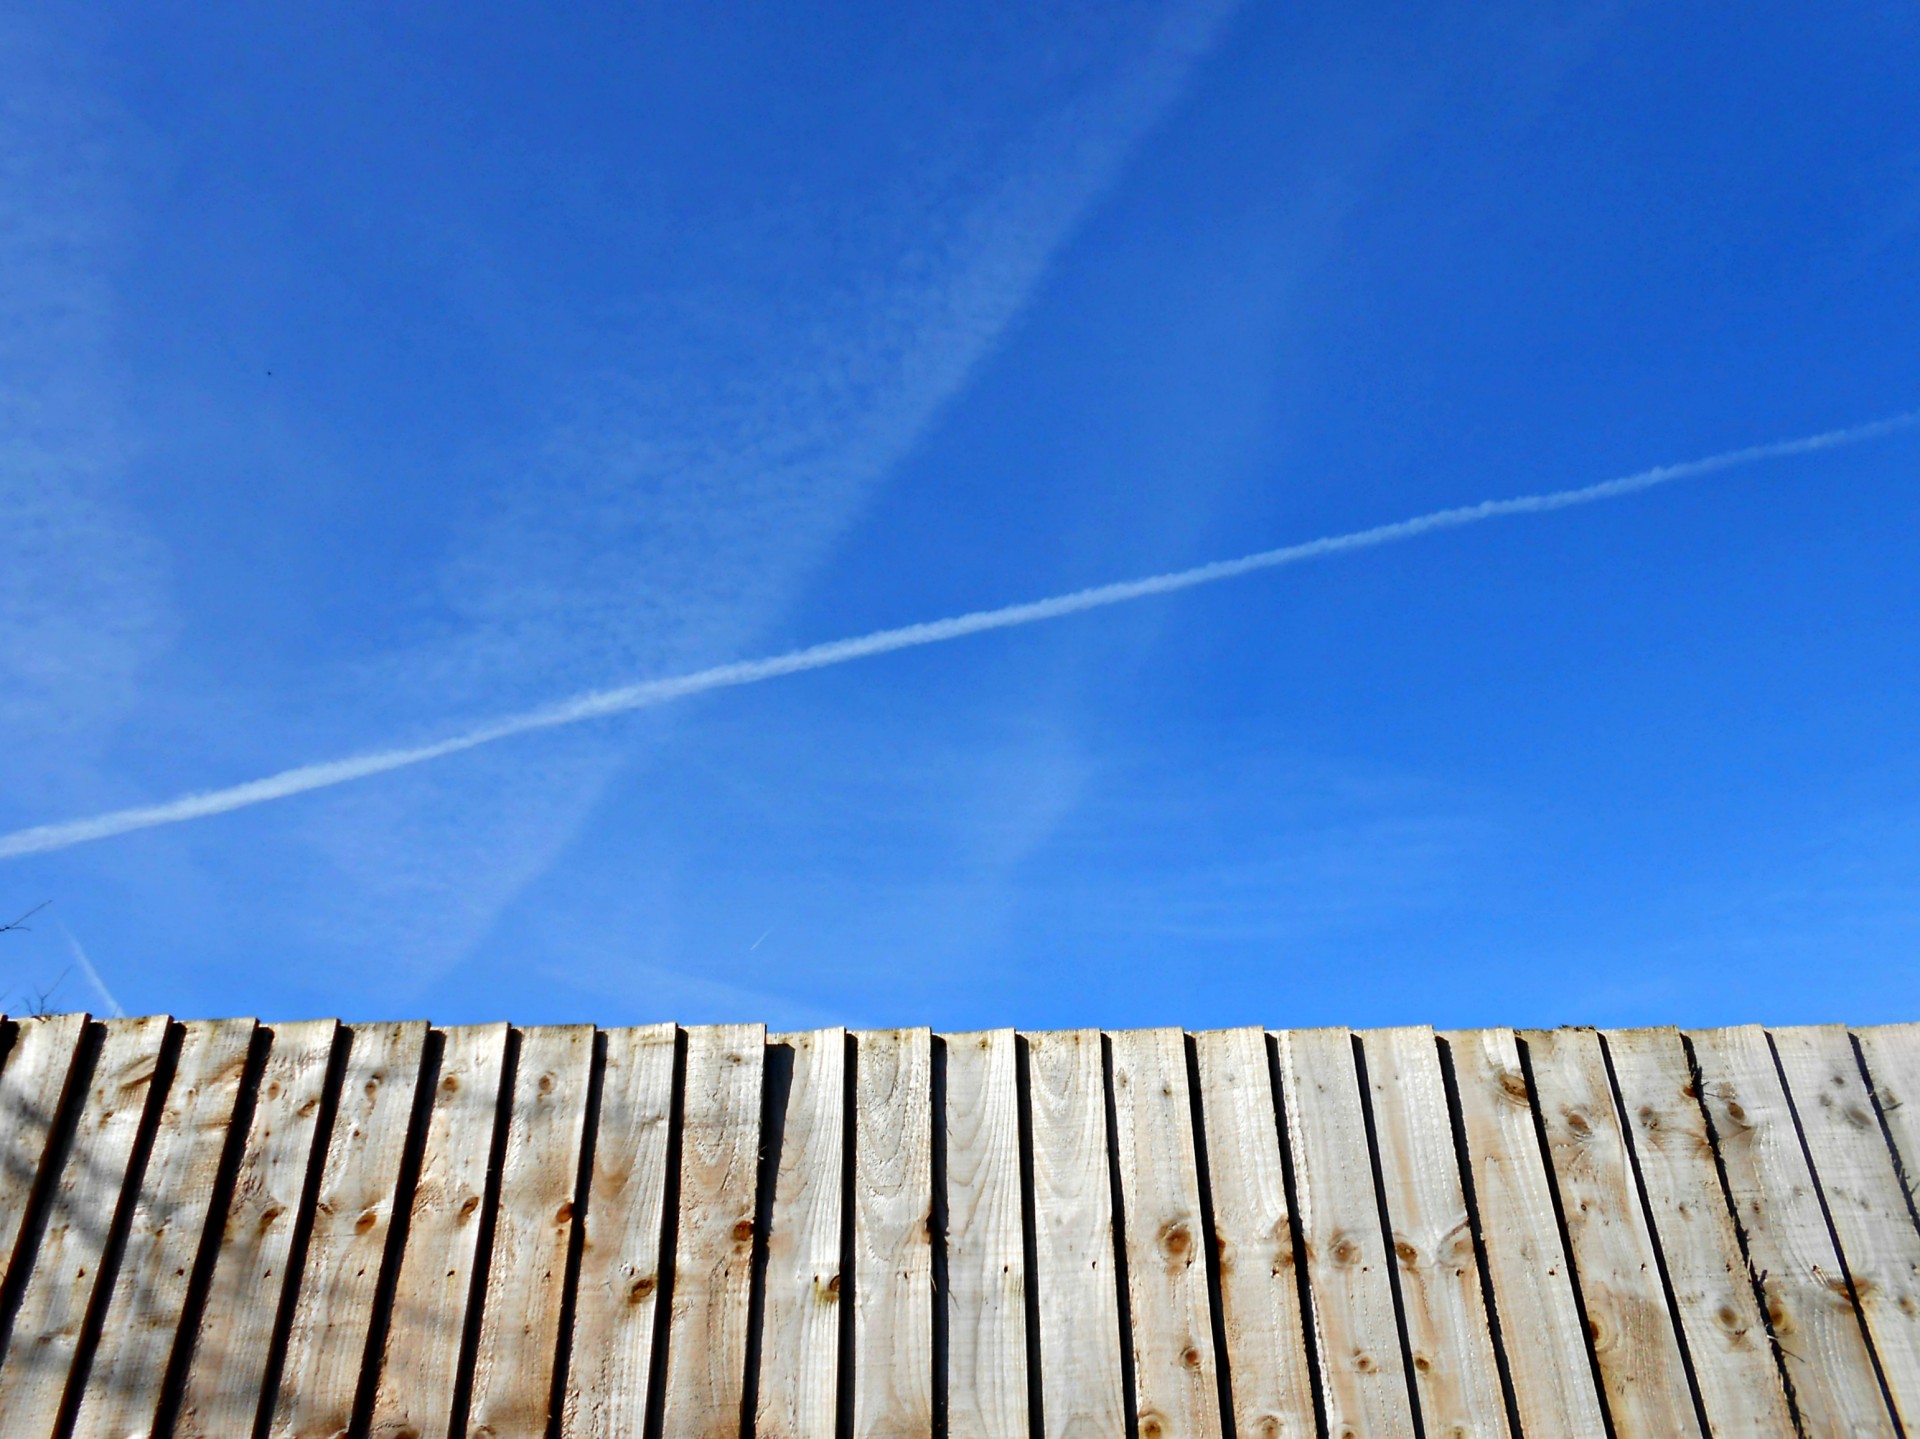 Blue Sky Contrasting Wooden Fence